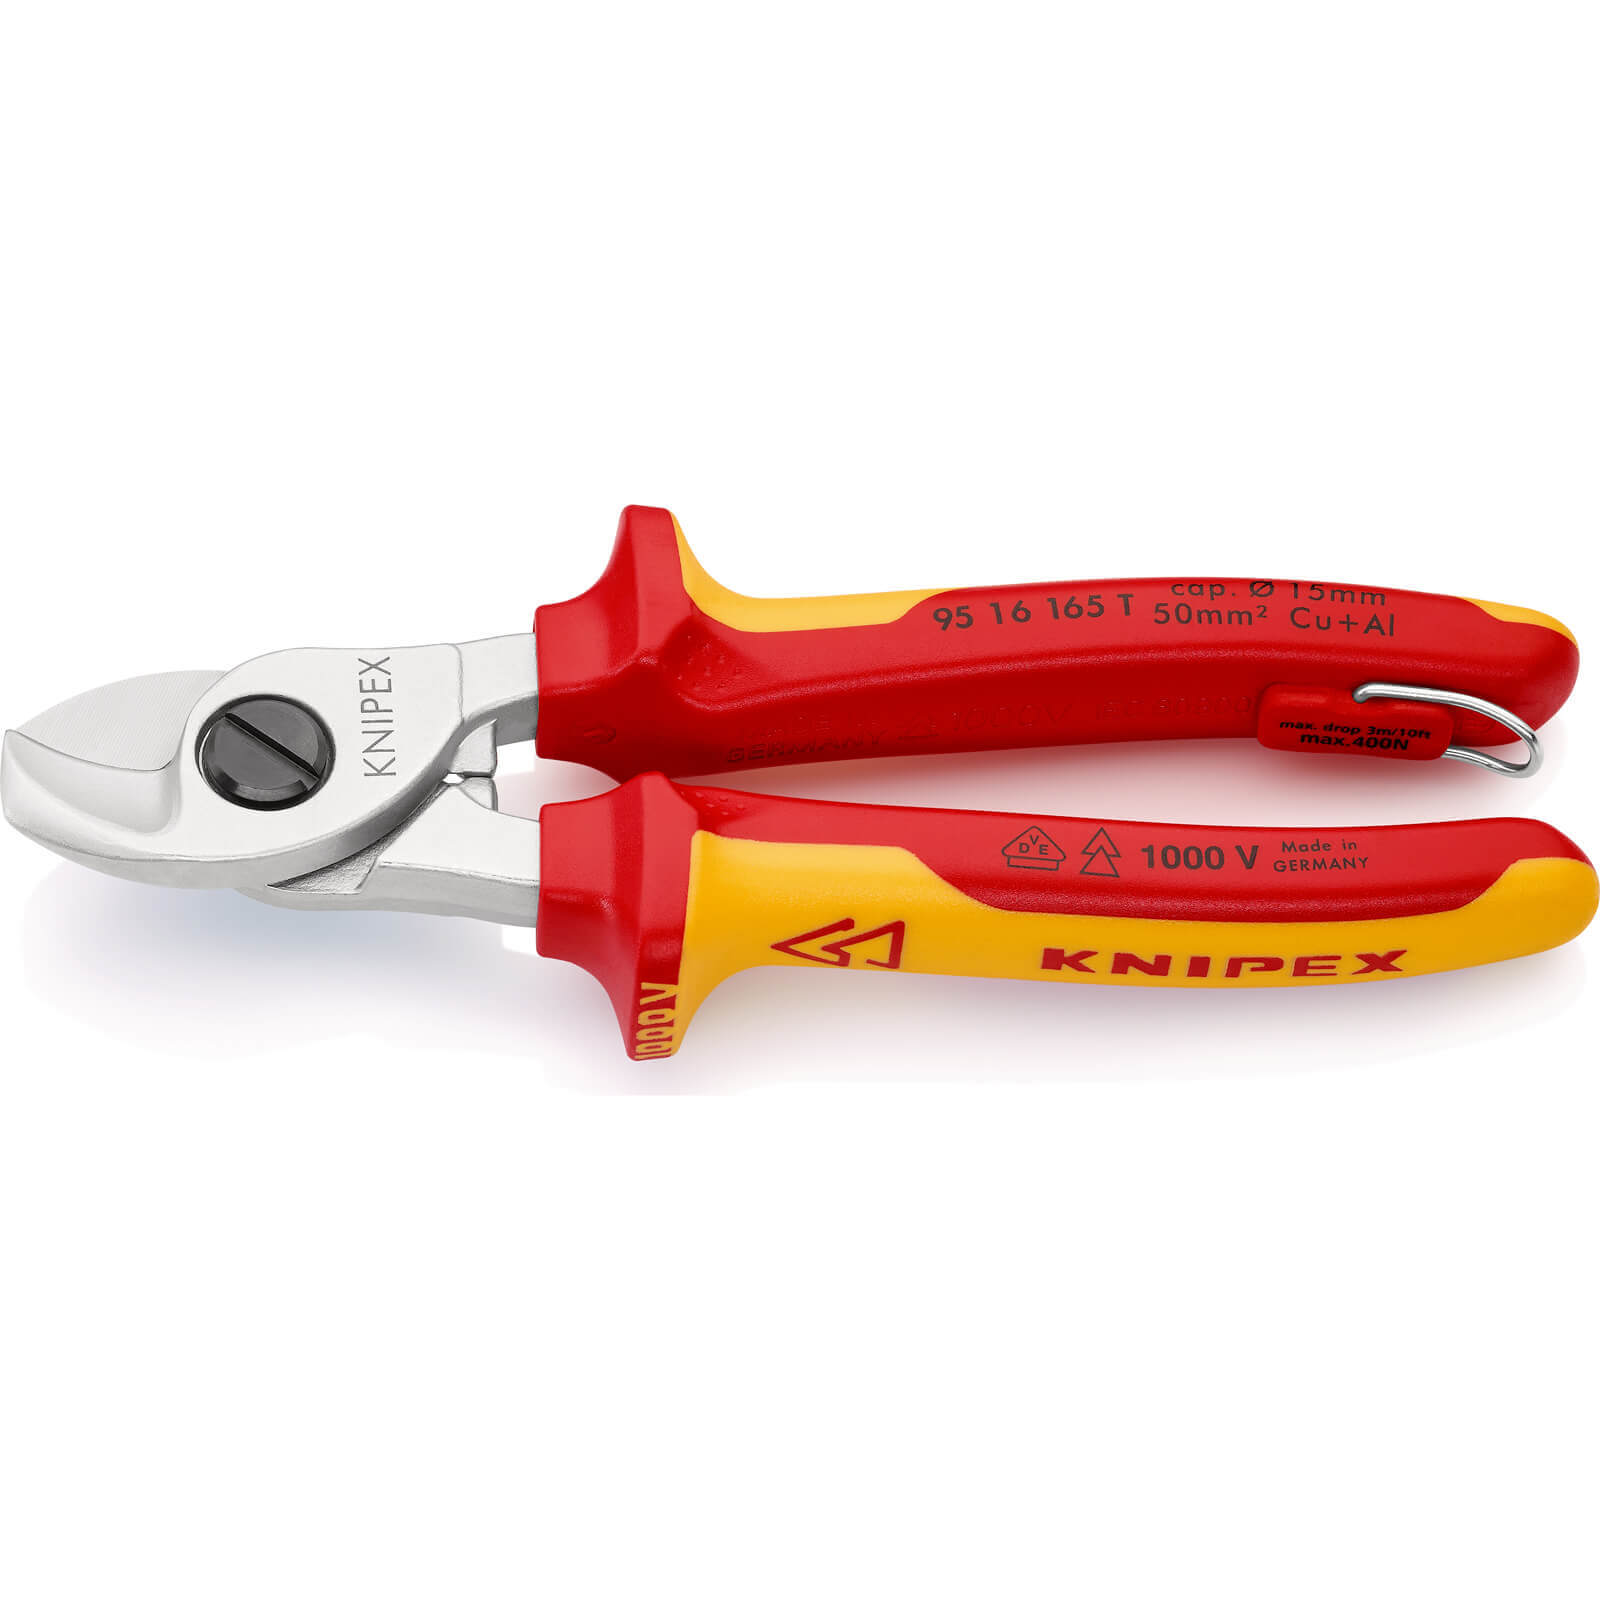 Photo of Knipex 95 16 Vde Insulated Tethered Cable Shears Pliers 165mm